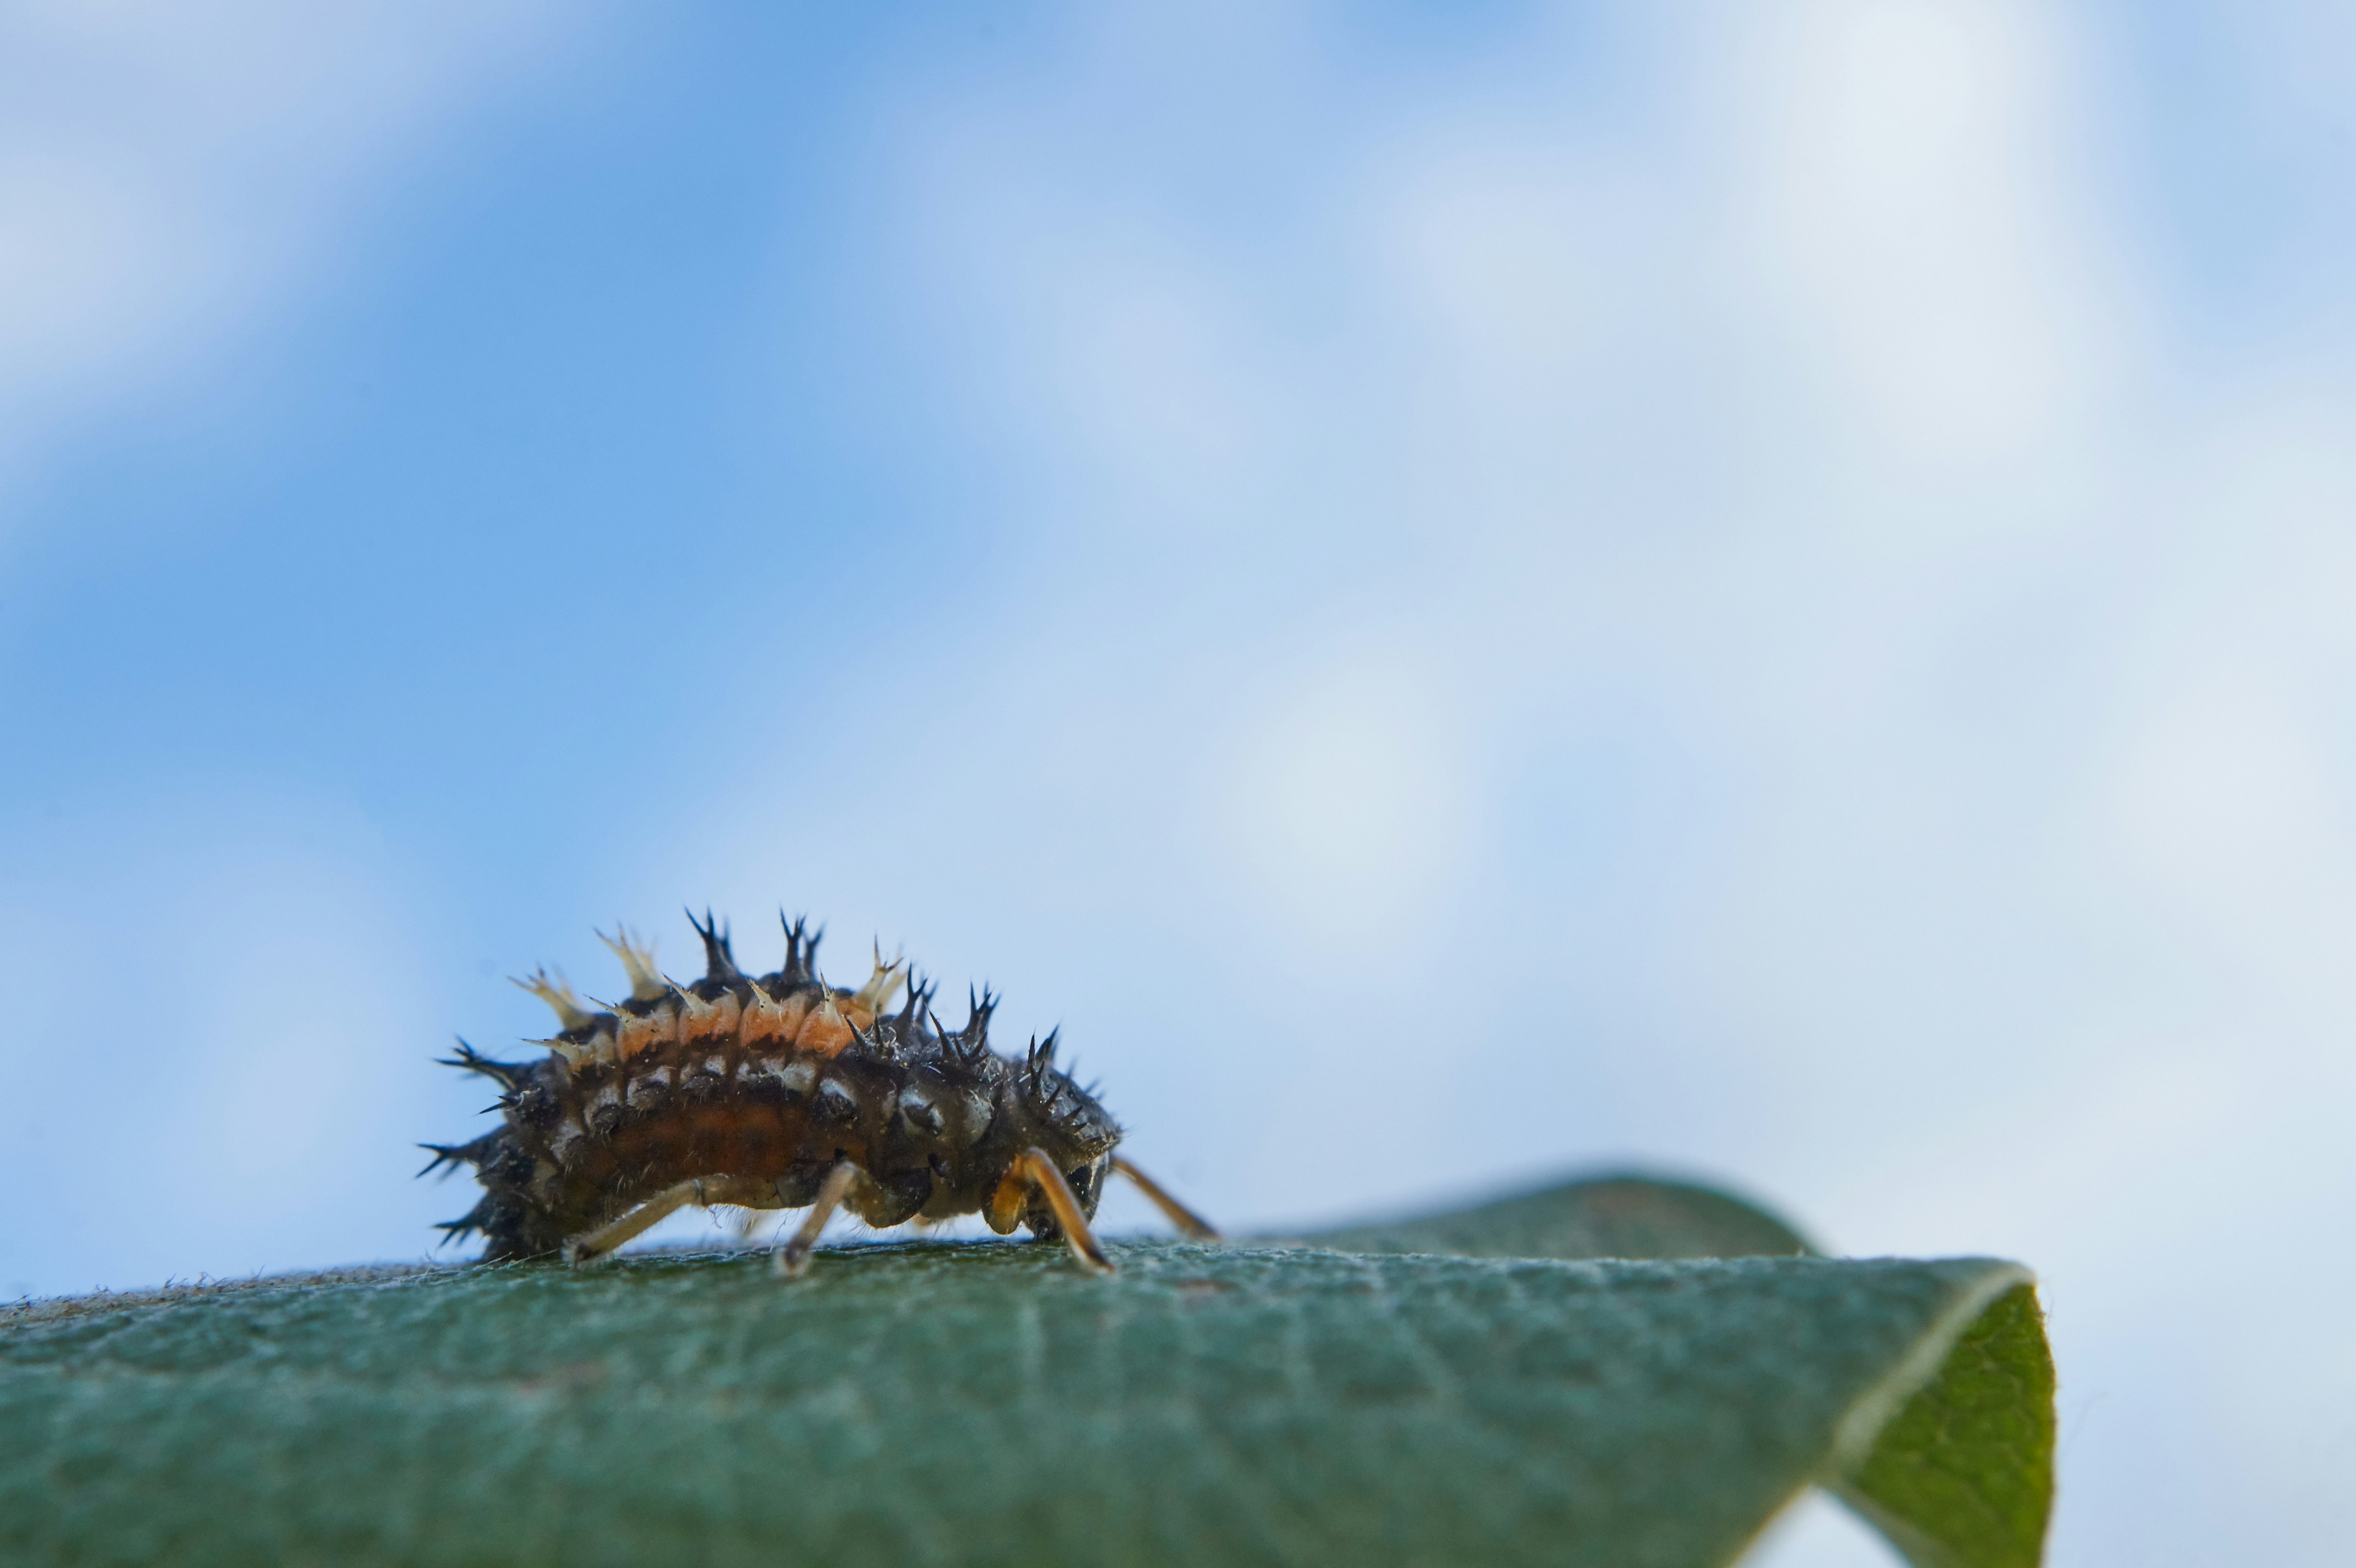 brown and black caterpillar on green leaf in close up photography during daytime